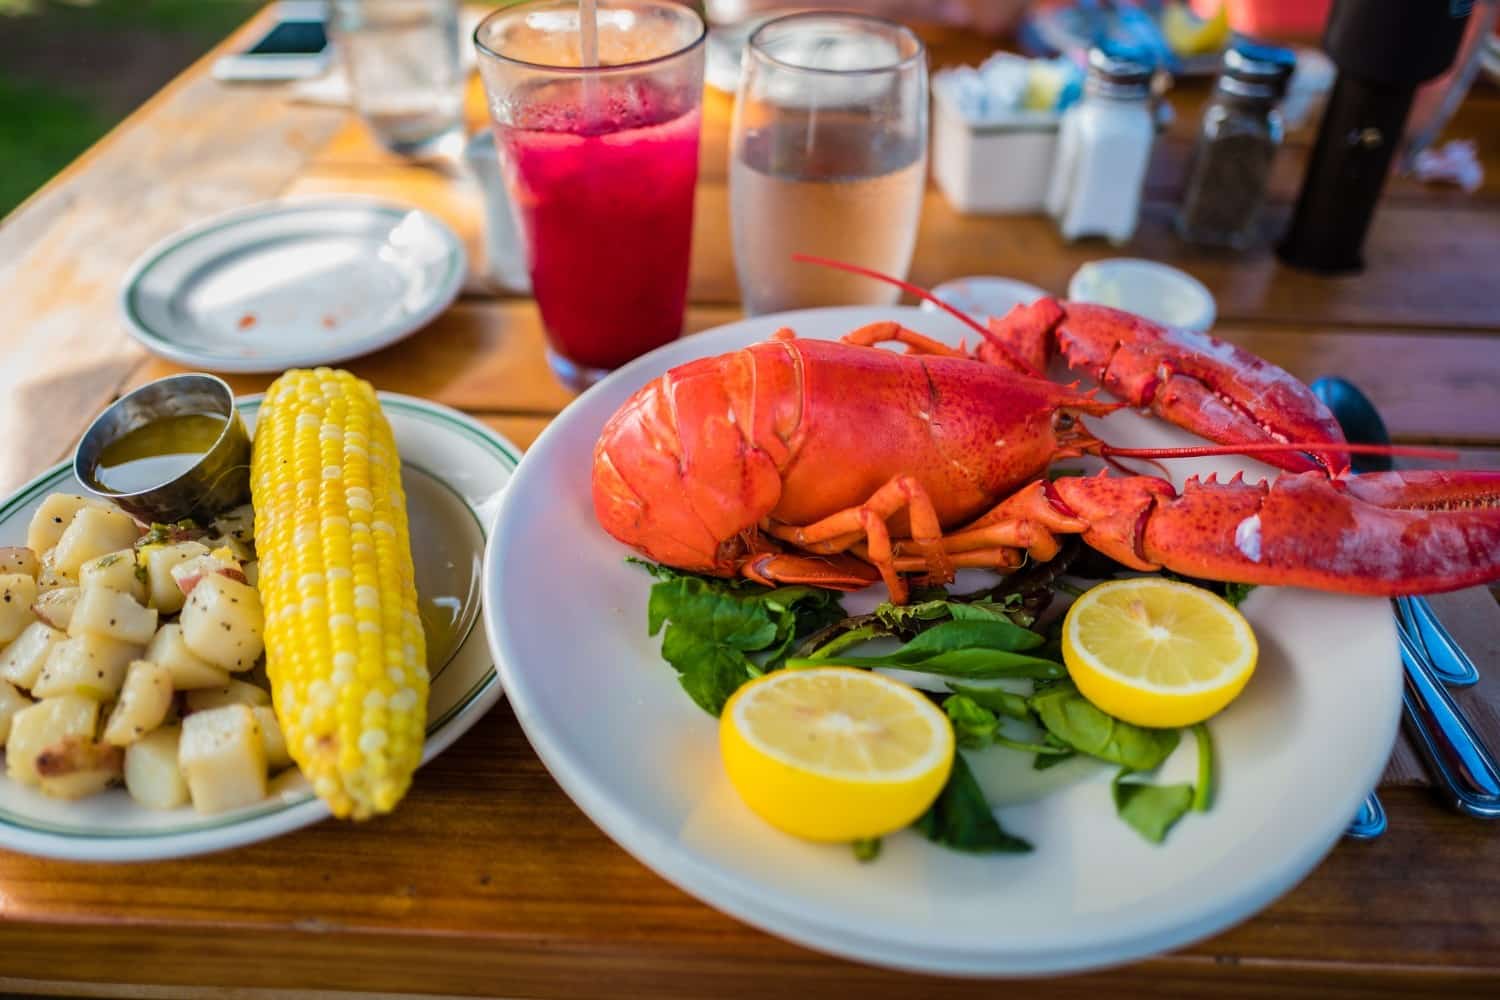 bright red lobster on a plate with greens and lemon beside an ear of yellow corn on the cob